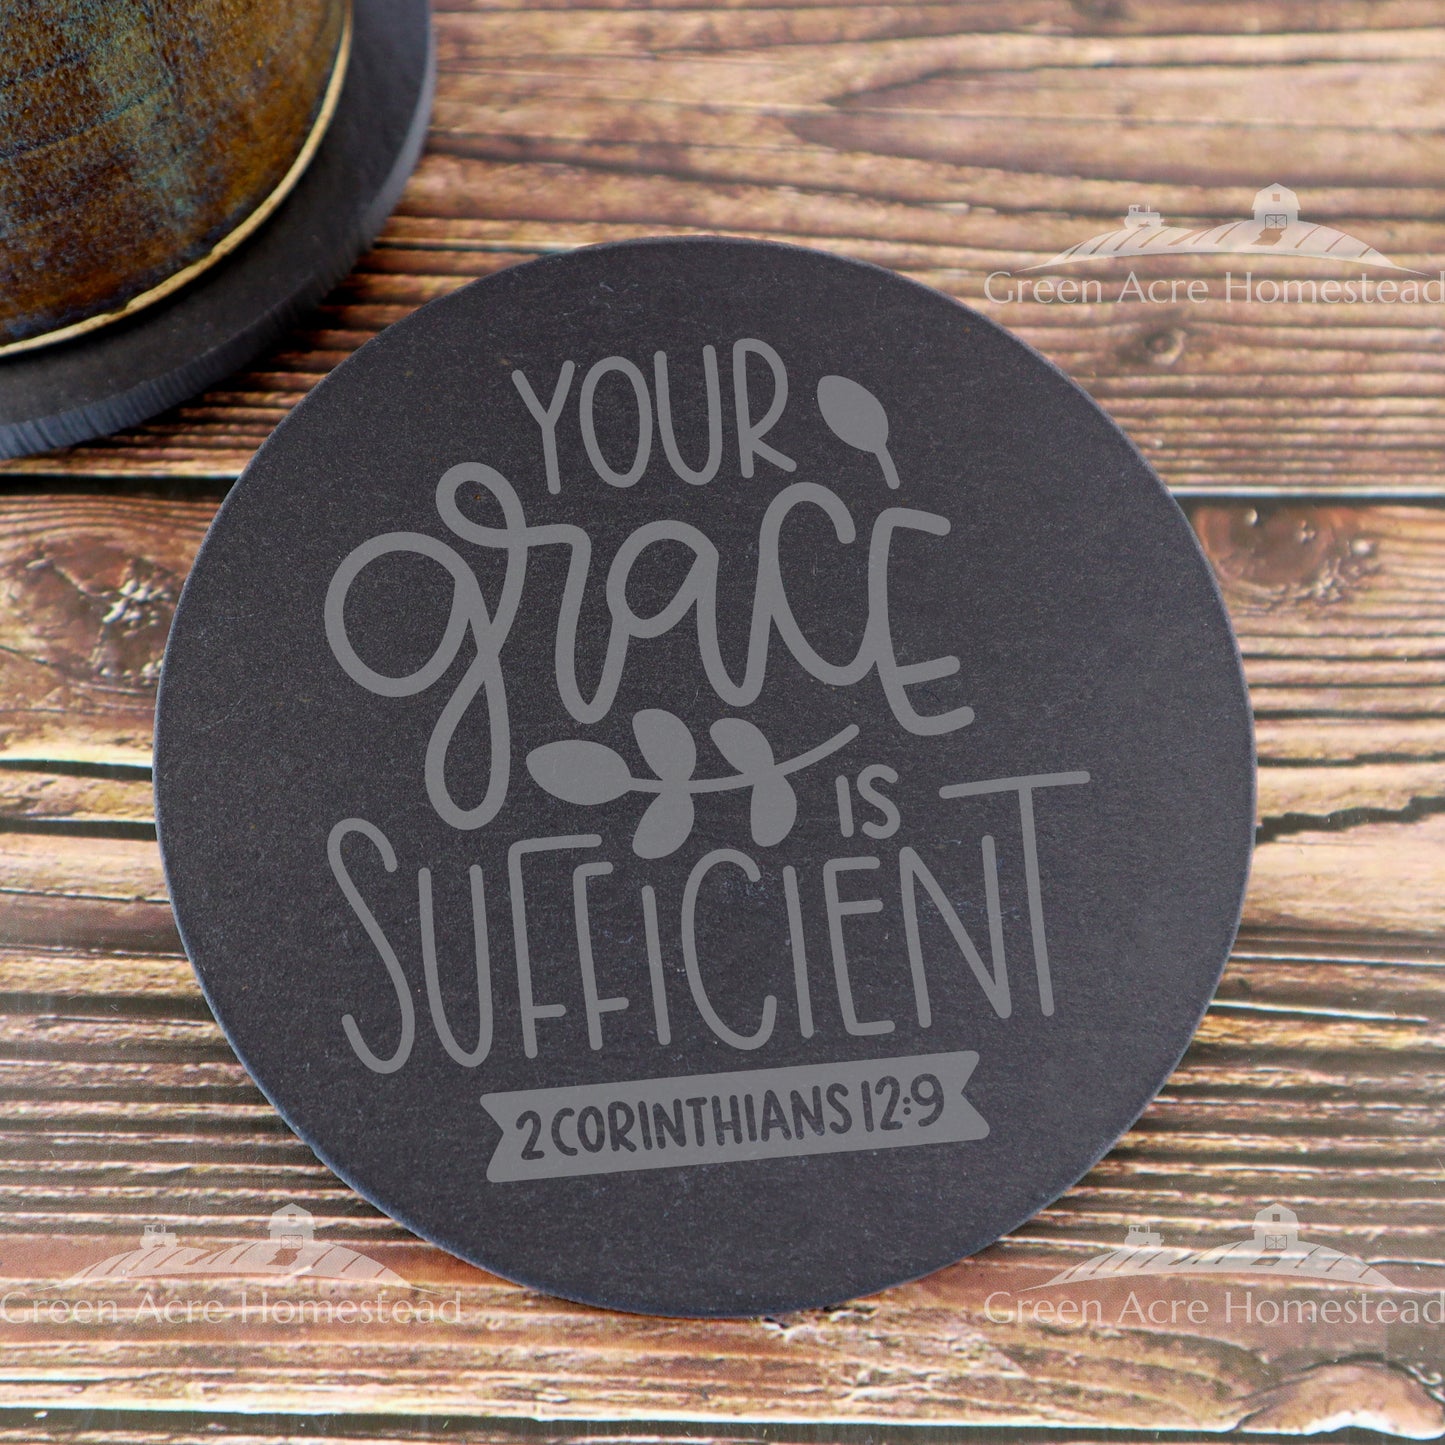 Your Grace is Sufficient - Bible Verse Slate Drink Coaster